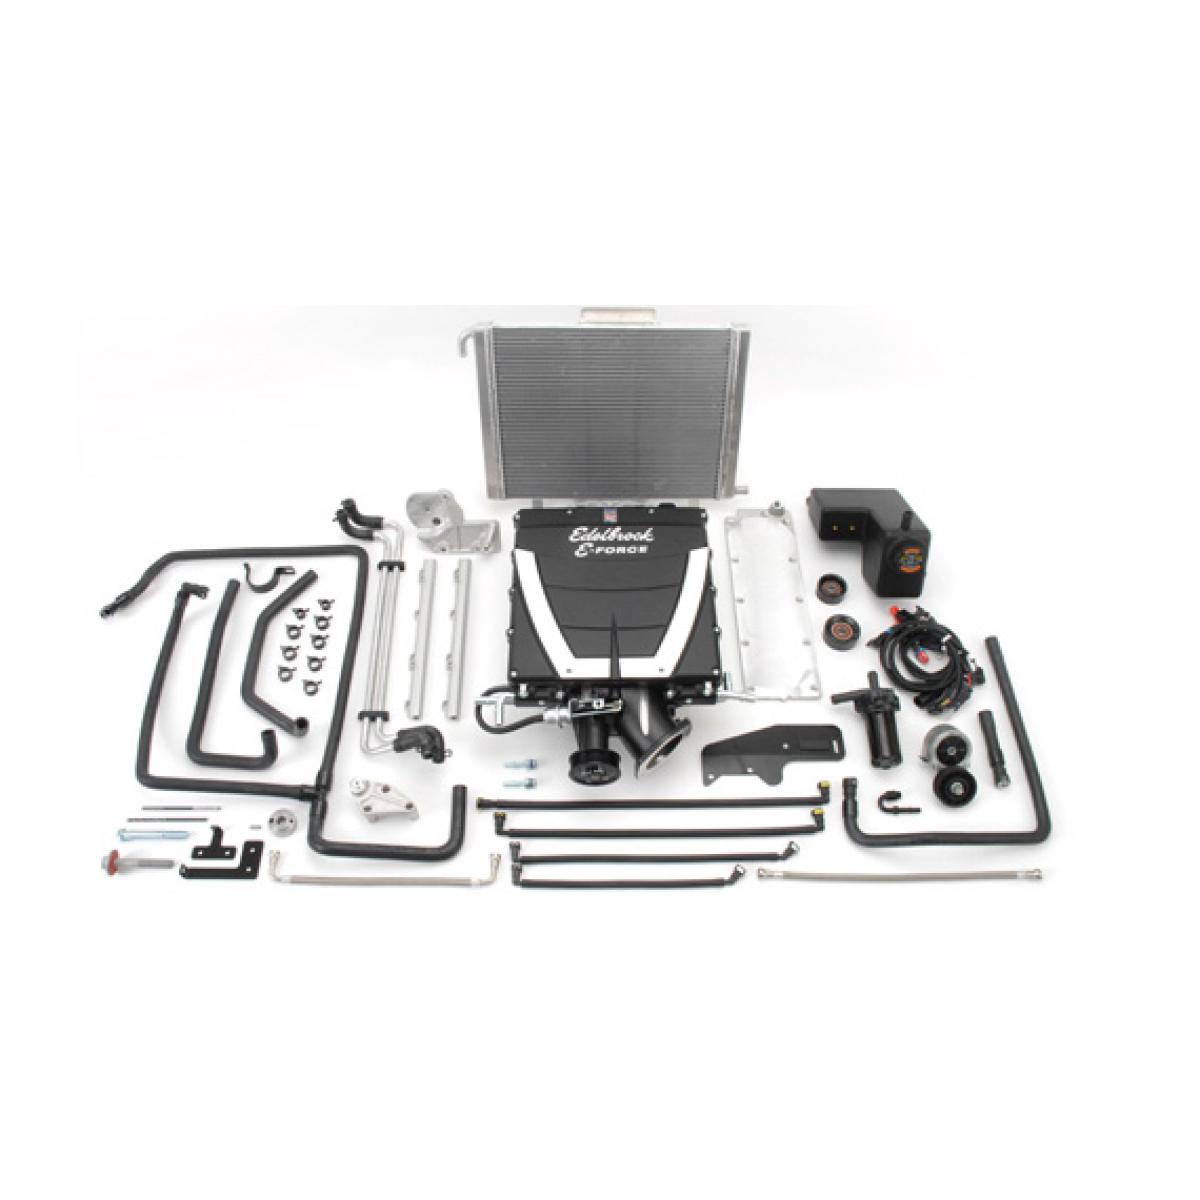 Edelbrock Supercharger, Stage 3-Profesional Tuner Kit, 2014-2015, GM, Camaro, 6.2L L99, Without Tuner, Part# 1596